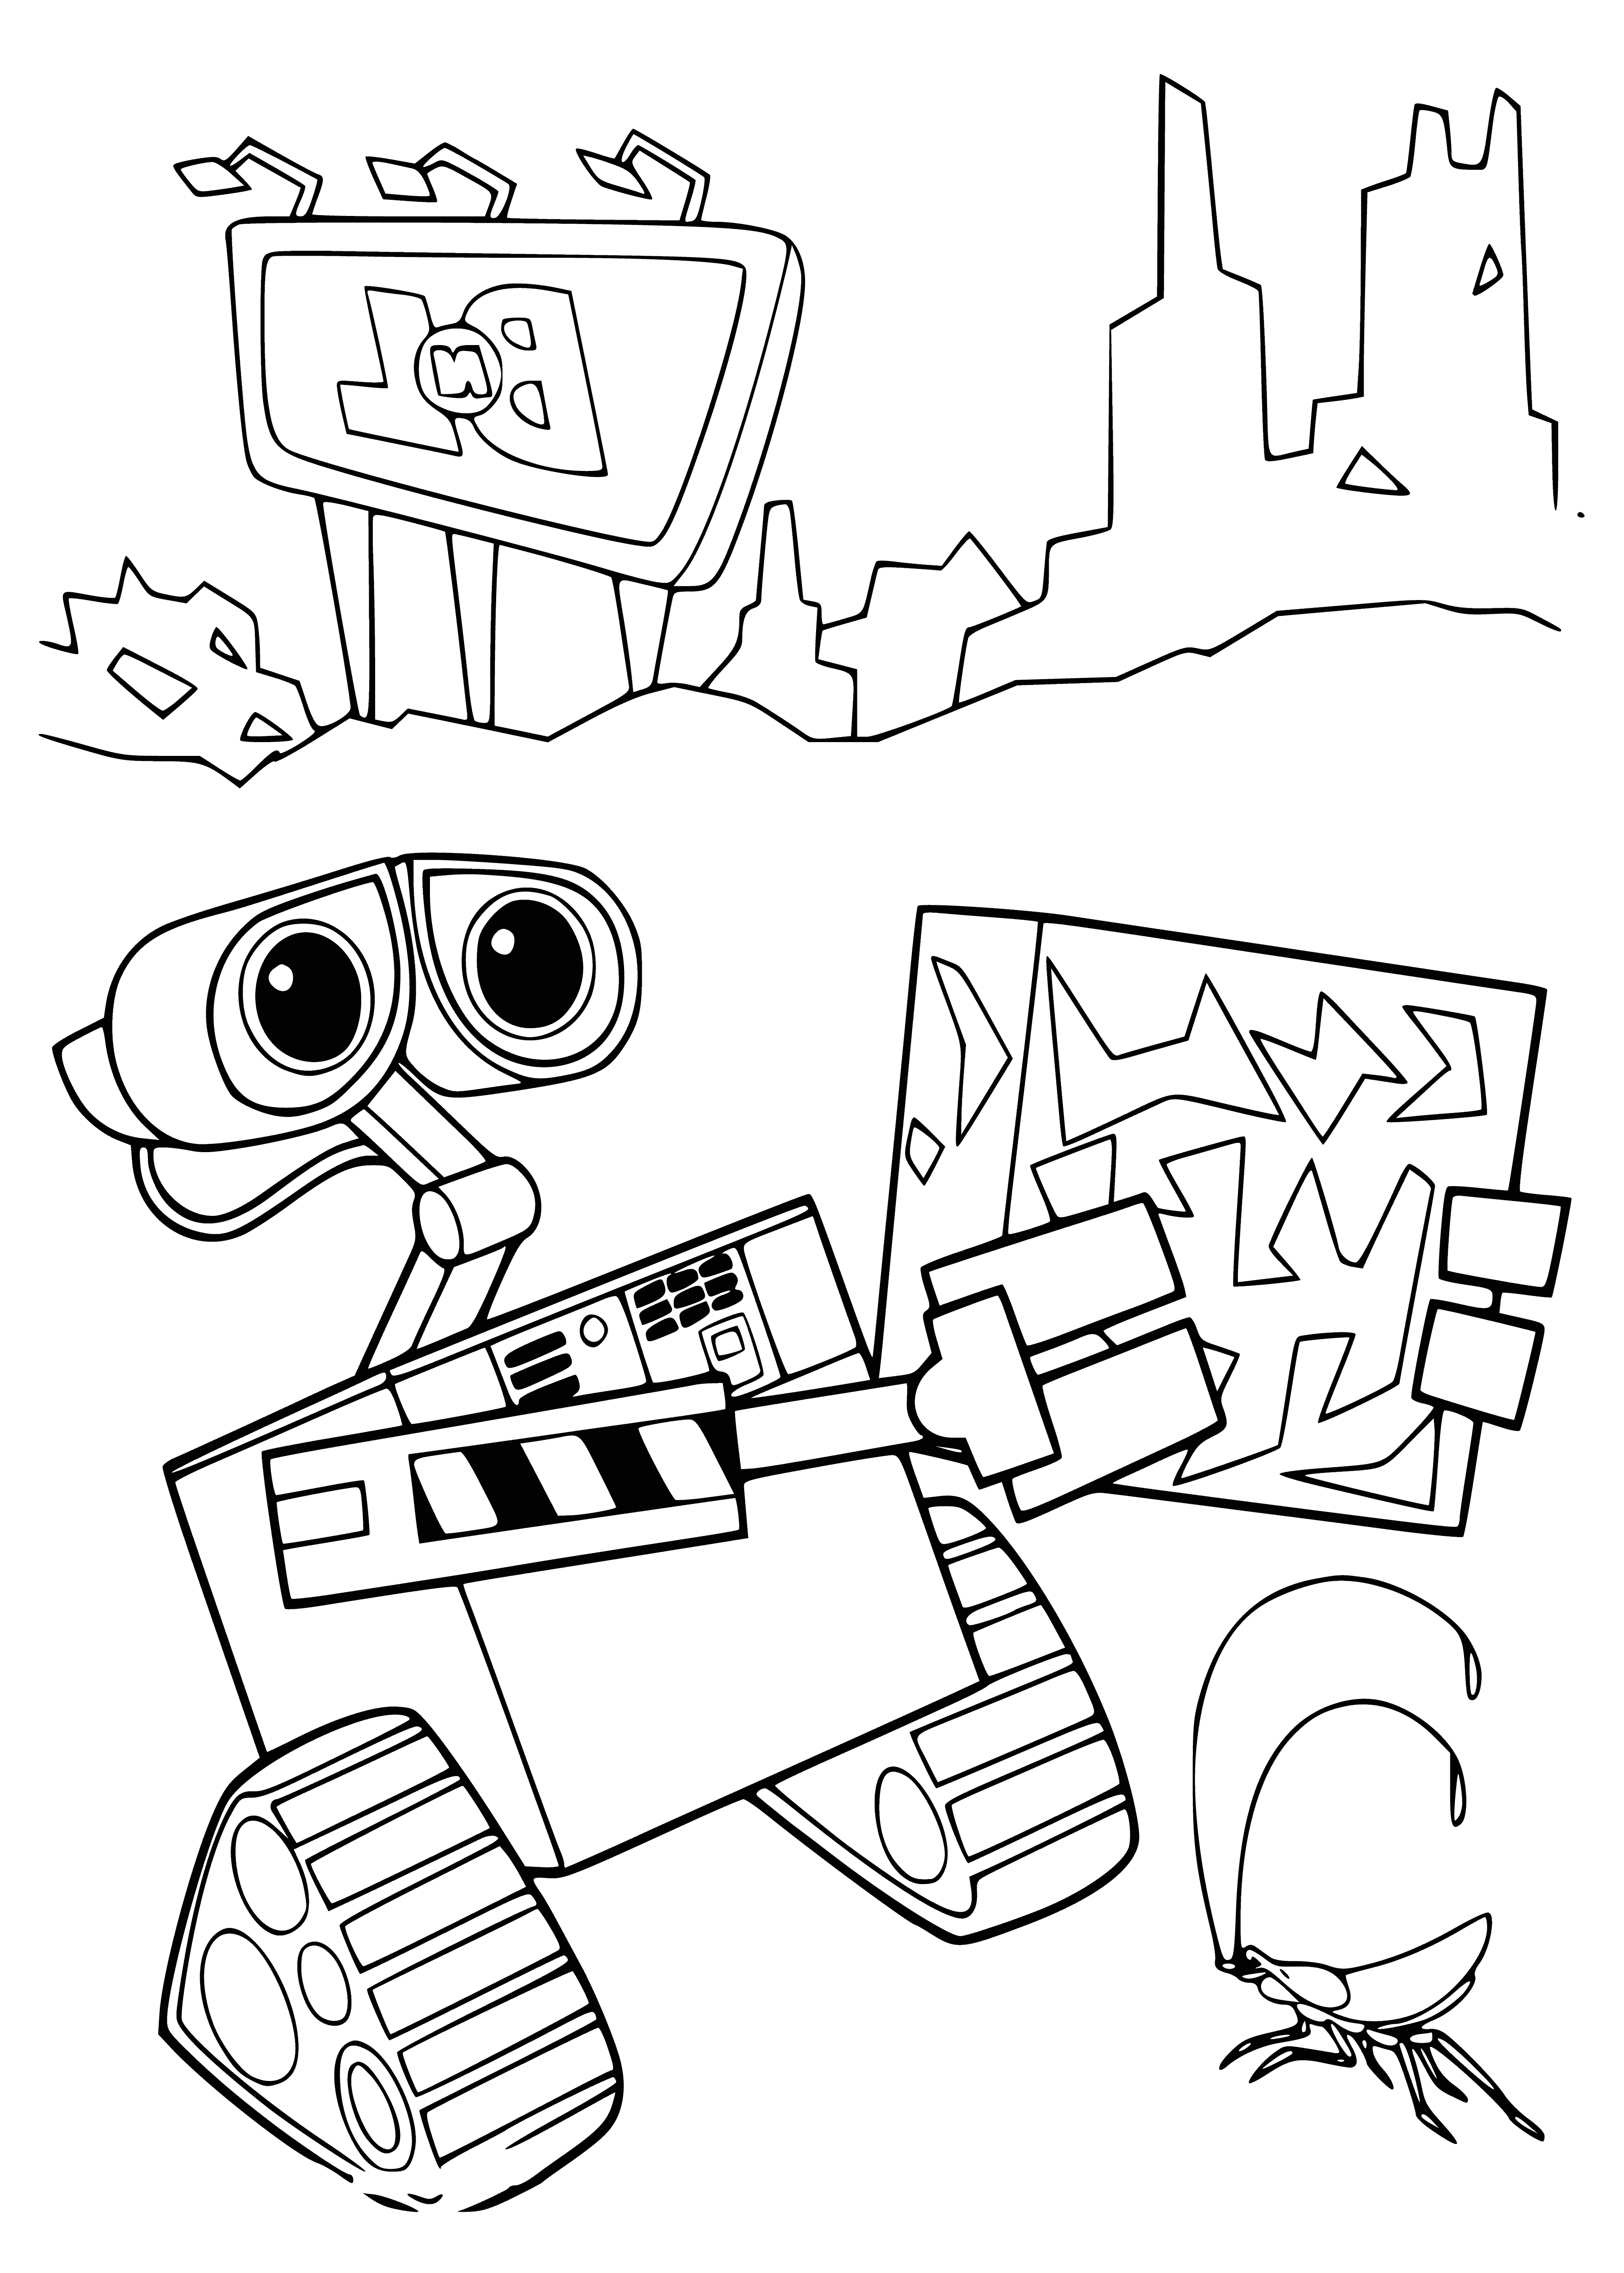 Valley and trash coloring page